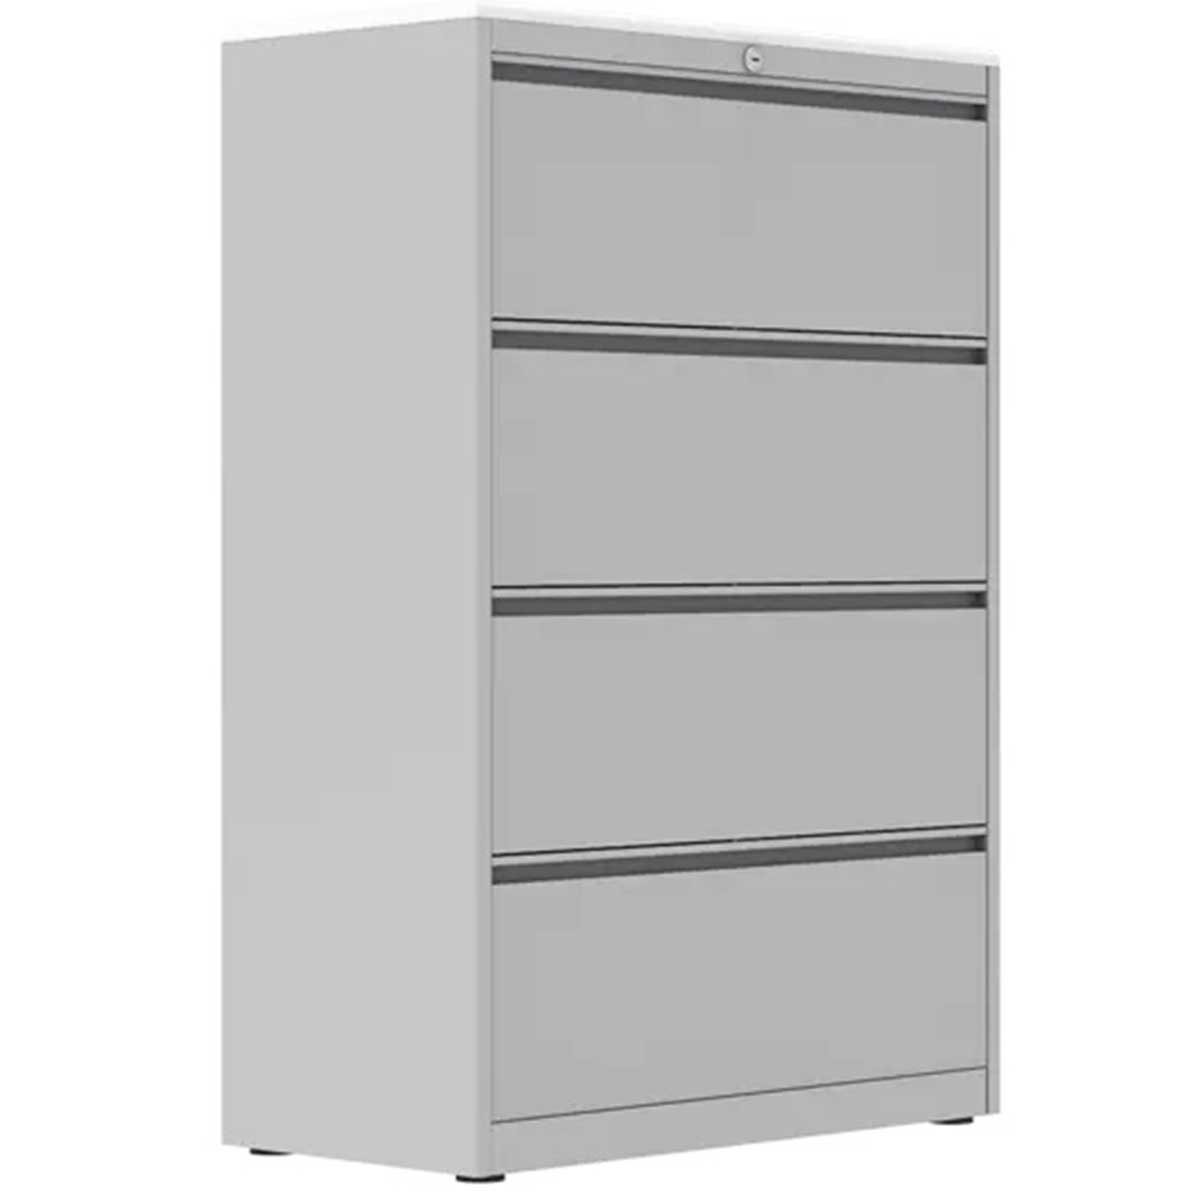 Fire Resistant File Cabinet Manufacturers, Suppliers in Rohini Sector 8